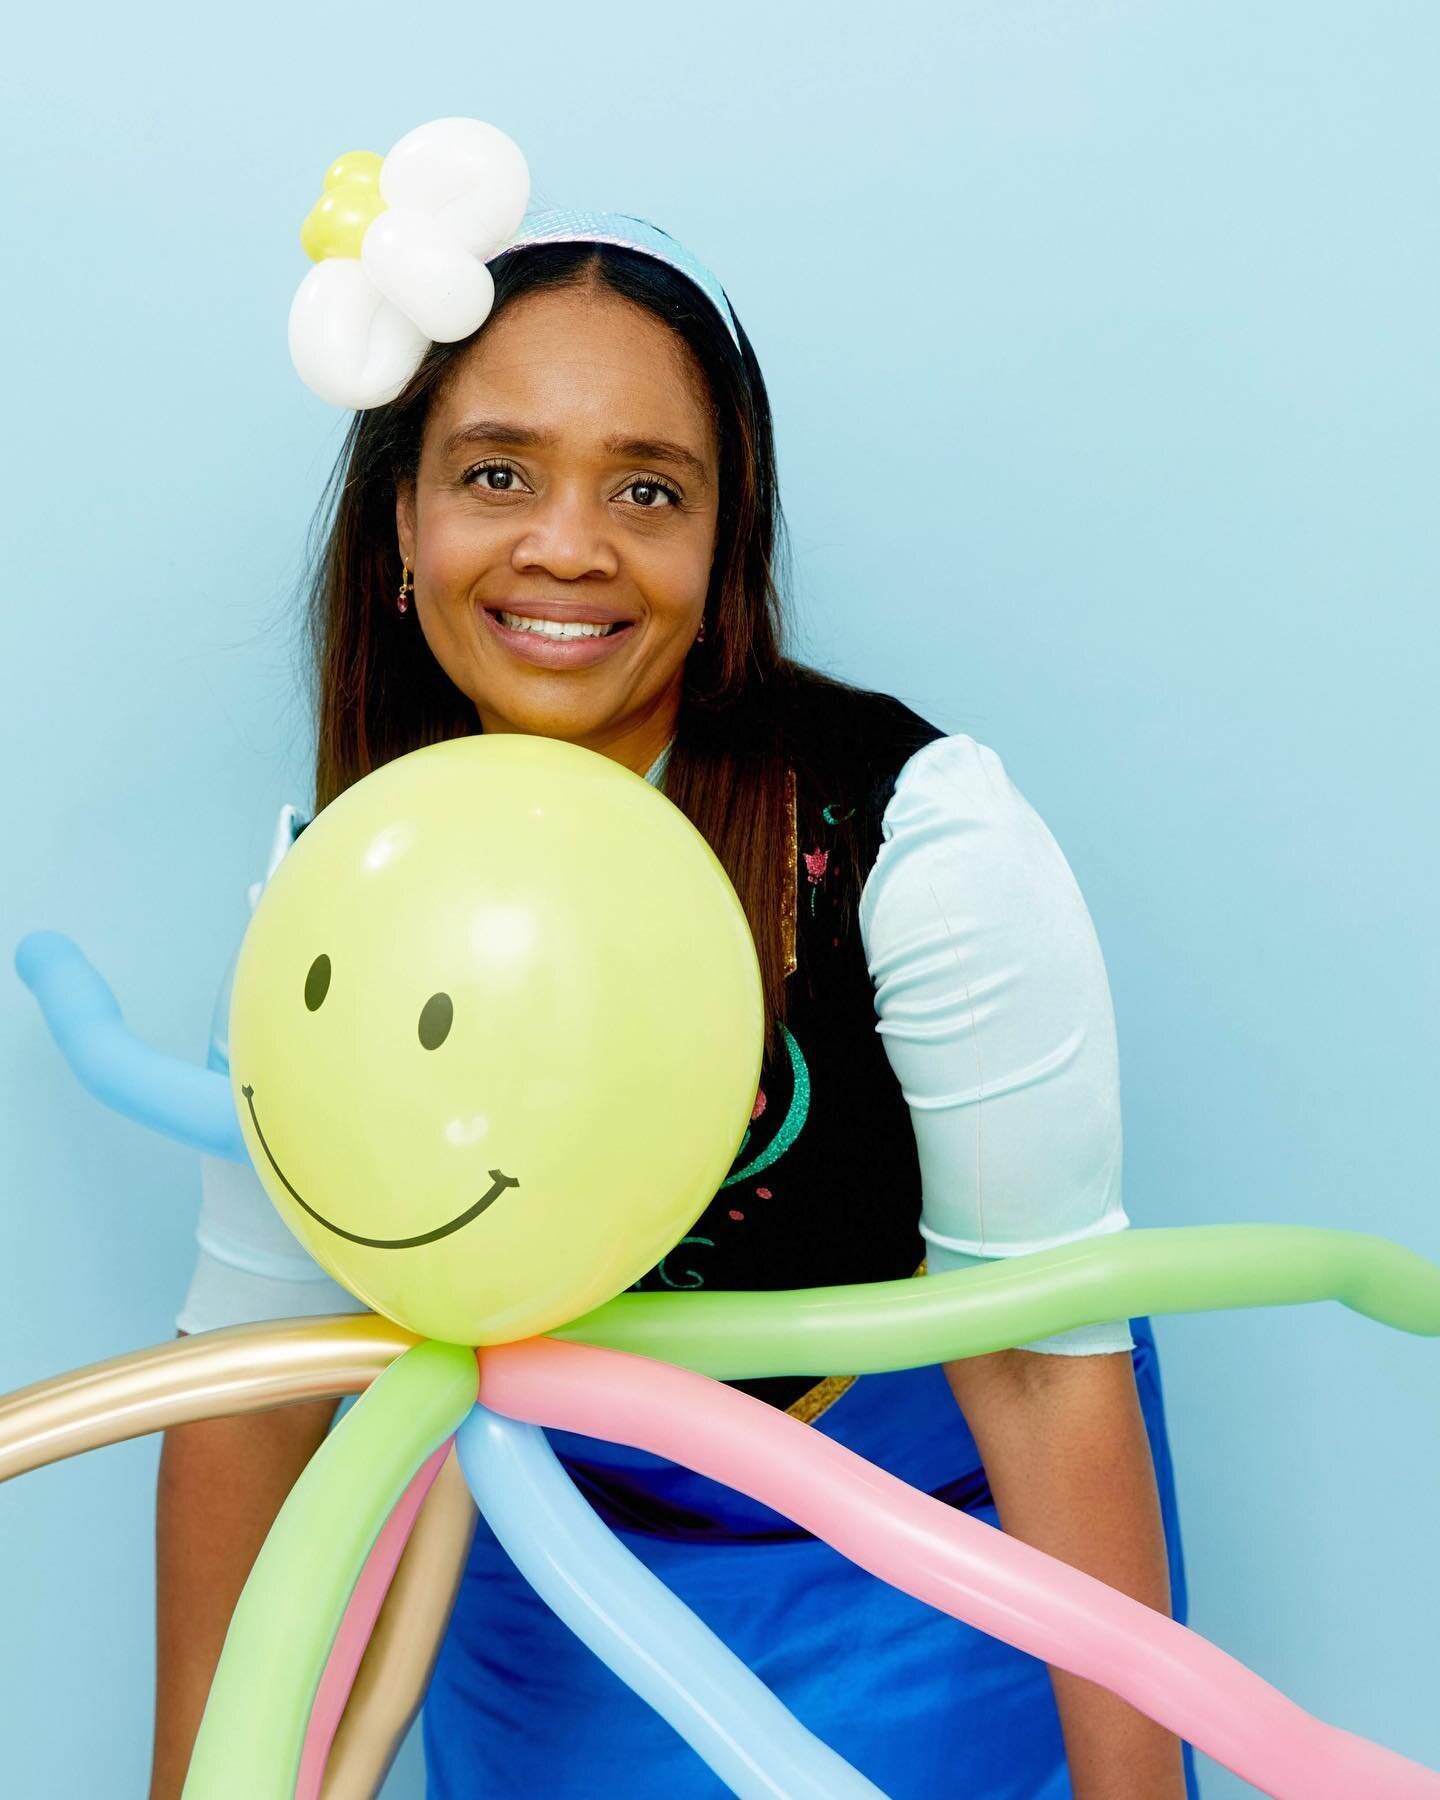 Celebrate Black History Month With misscypriana balloons-I don&rsquo;t know about you, but I&rsquo;m at the point in my life that I don&rsquo;t want to mess anything up. I want to see God&rsquo;s face when my work on earth has ended and feel proud of